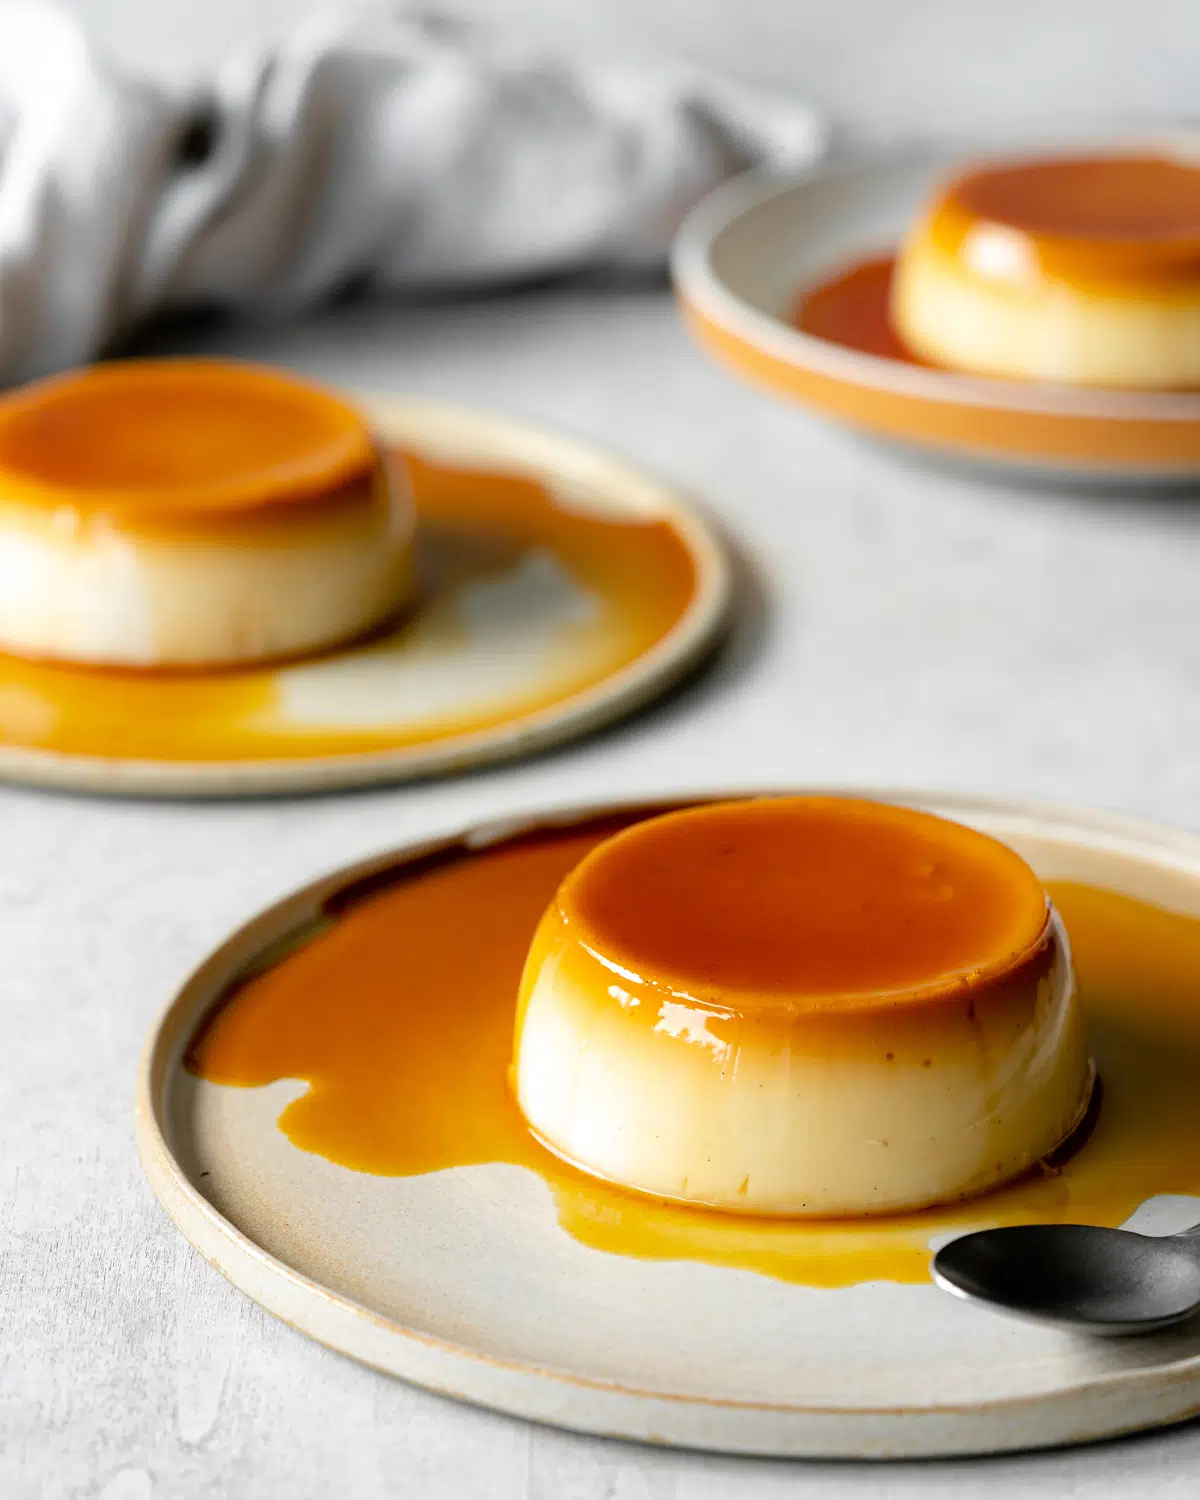 three flans on plates covered in caramel sauce.